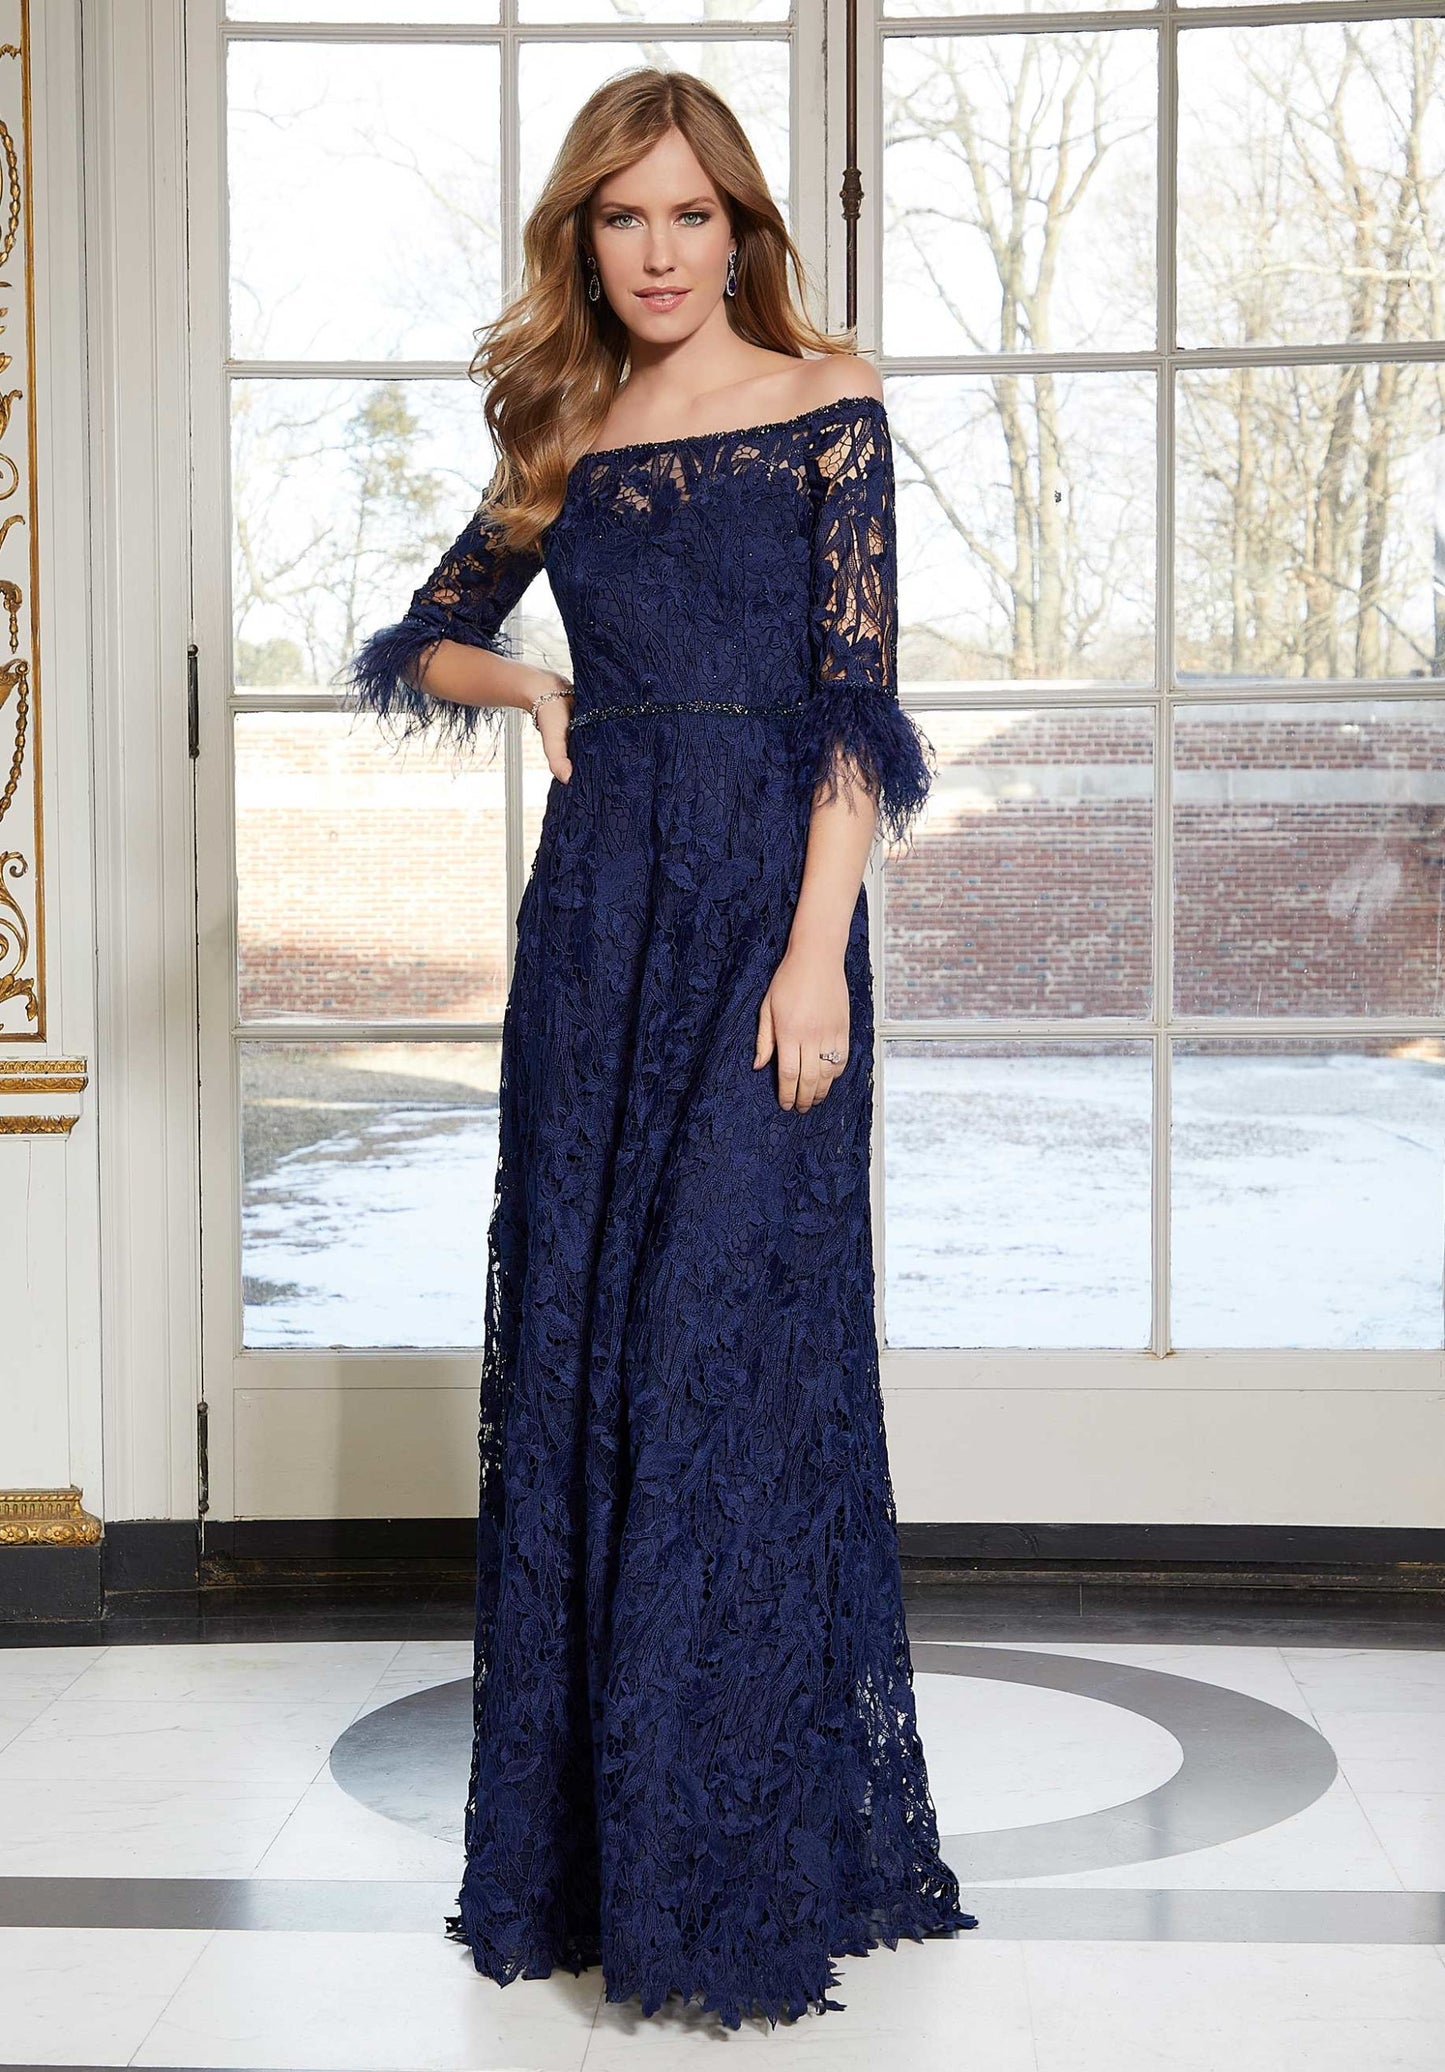 Venice Lace Evening Gown With Feathered Sleeves Morilee